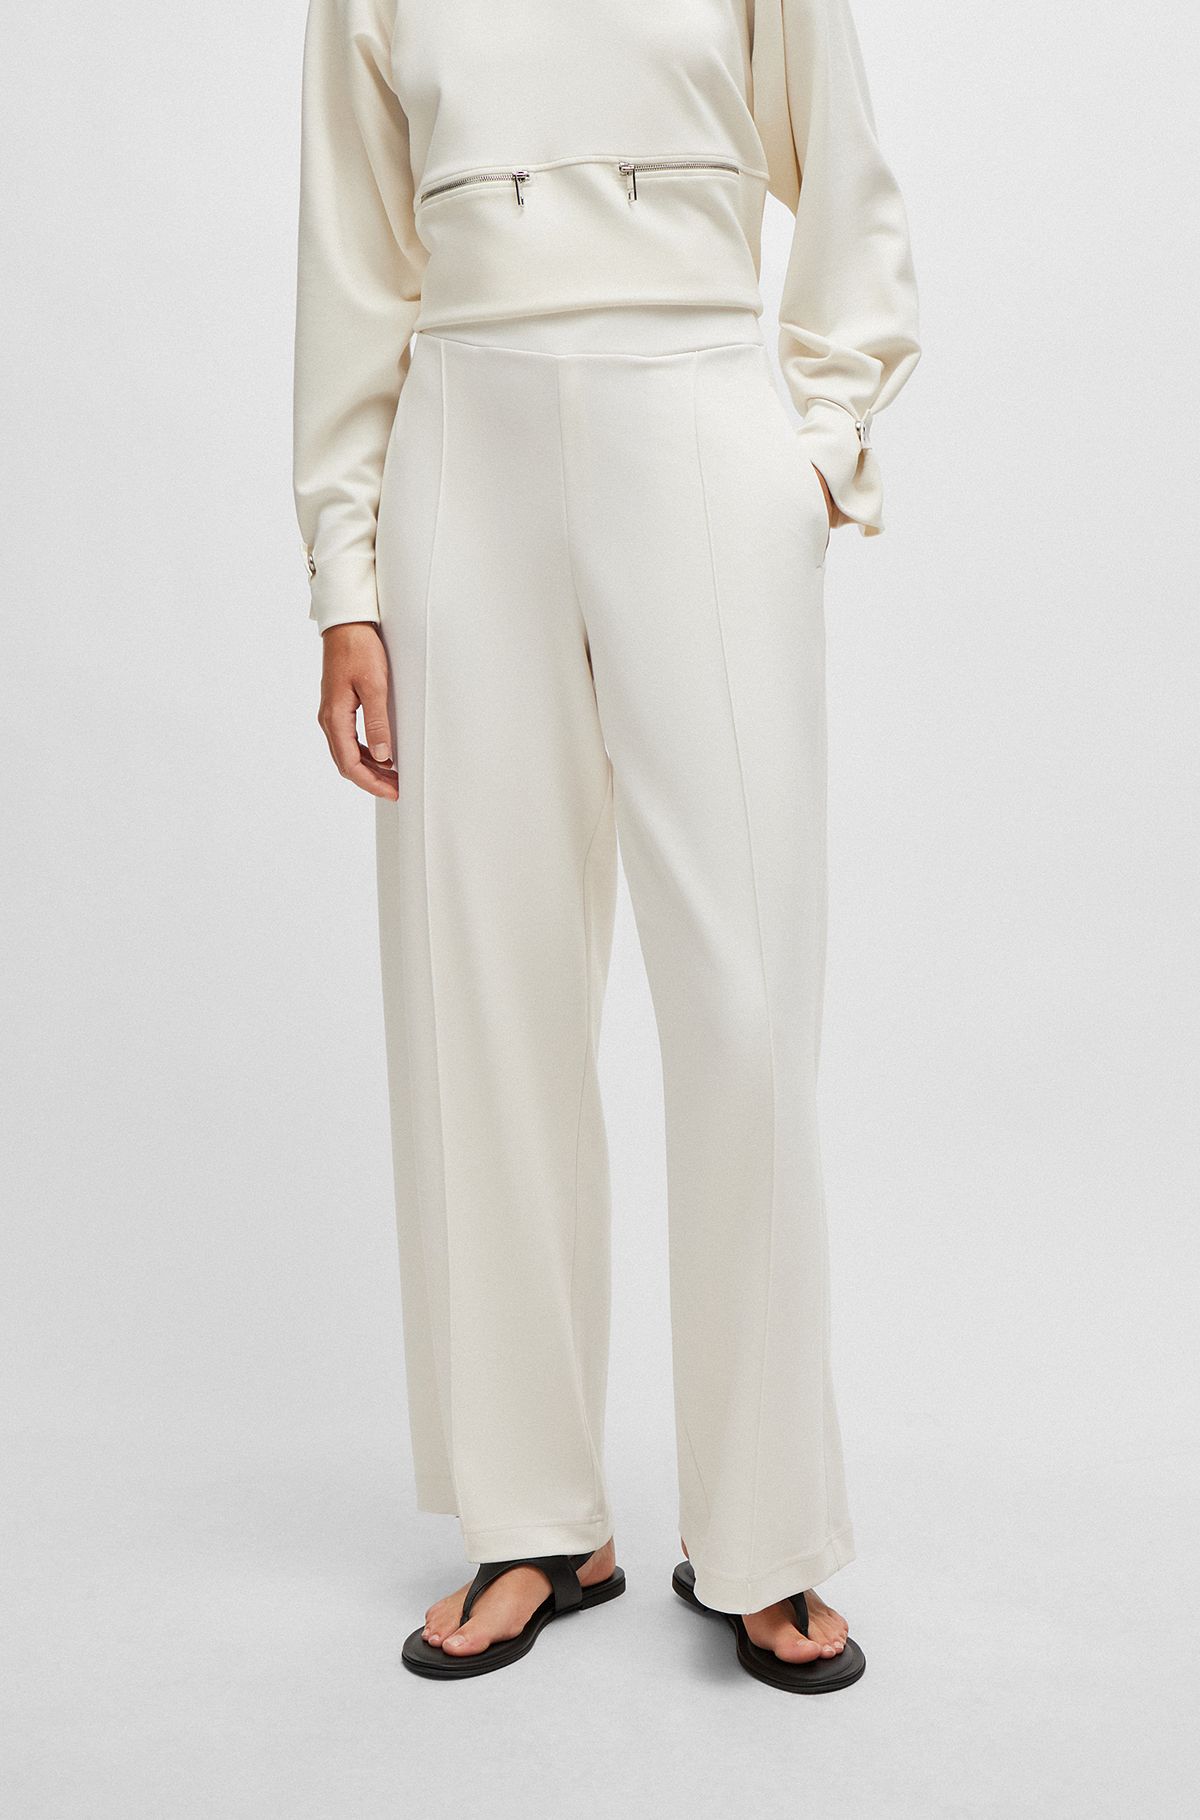 Piqué jersey trousers with front pleats, White